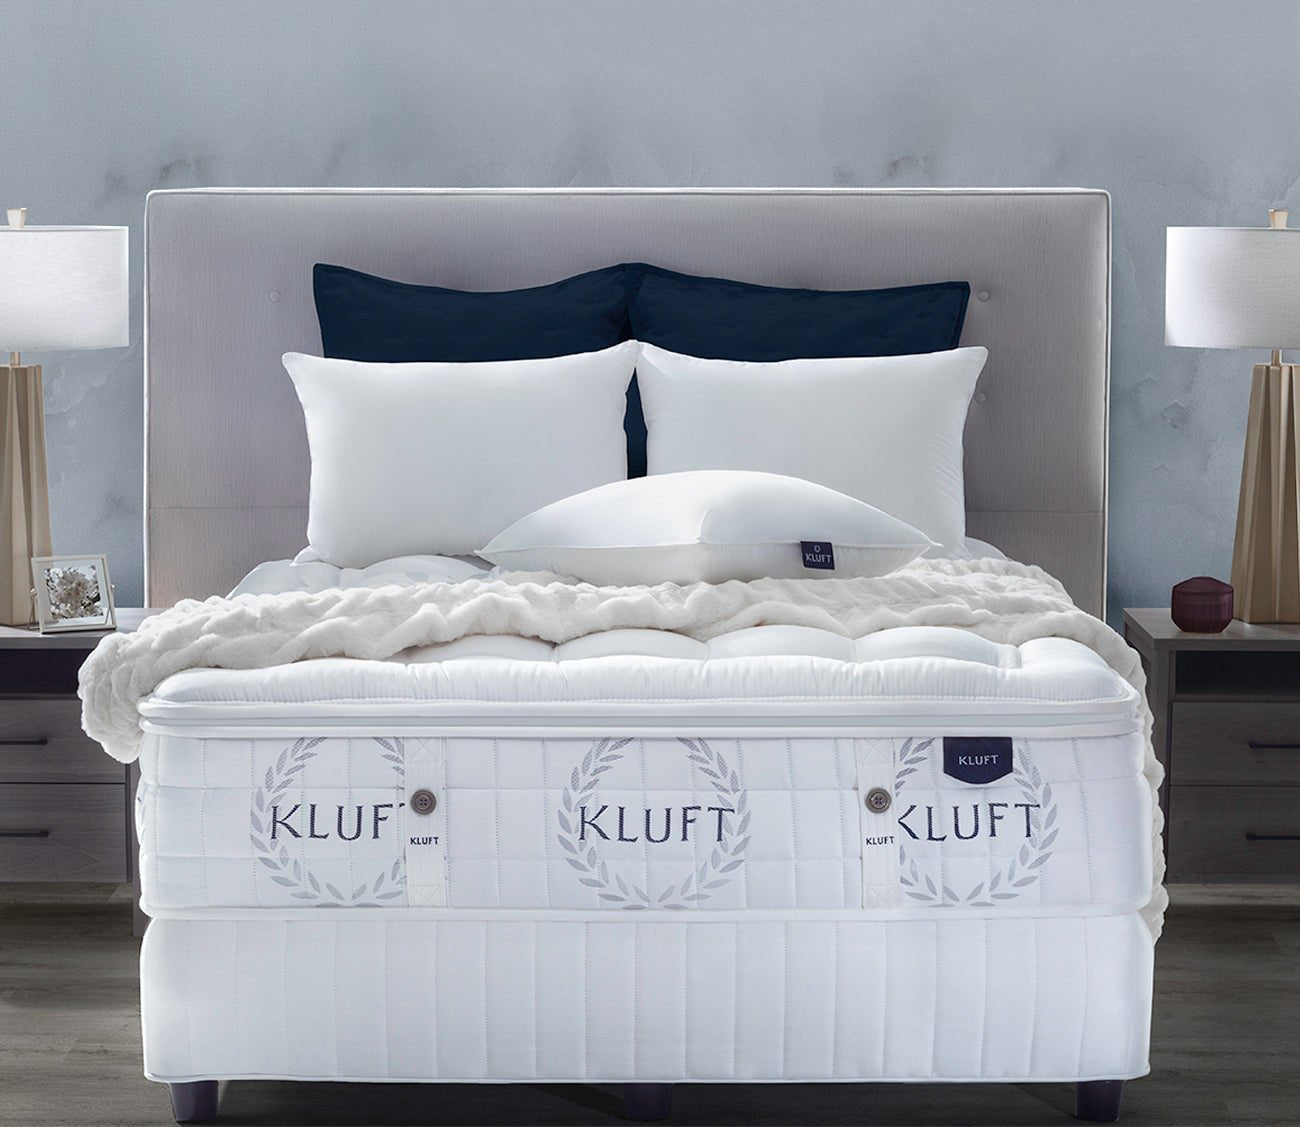 Plume Latex and Down Pillow by Kluft